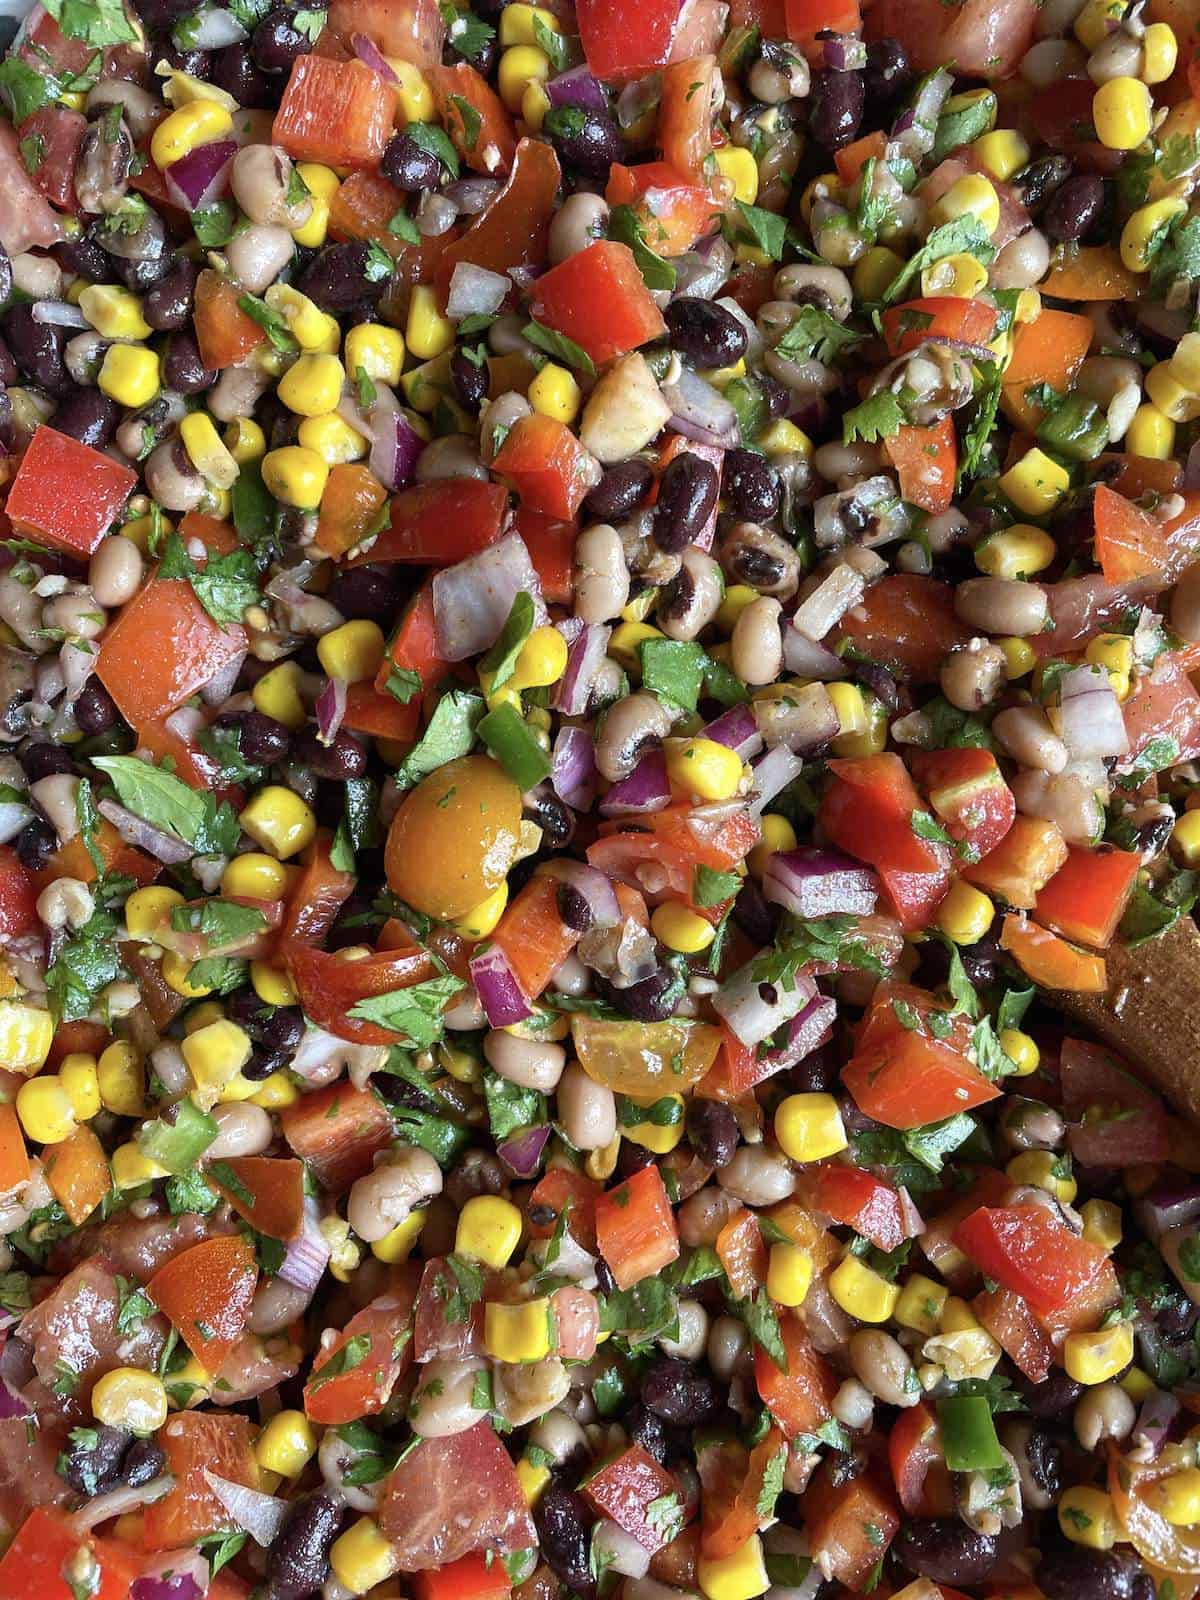 Cowboy caviar up close - black-eyed peas, black beans, corn, tomatoes, and peppers with a vinegar based dressing.